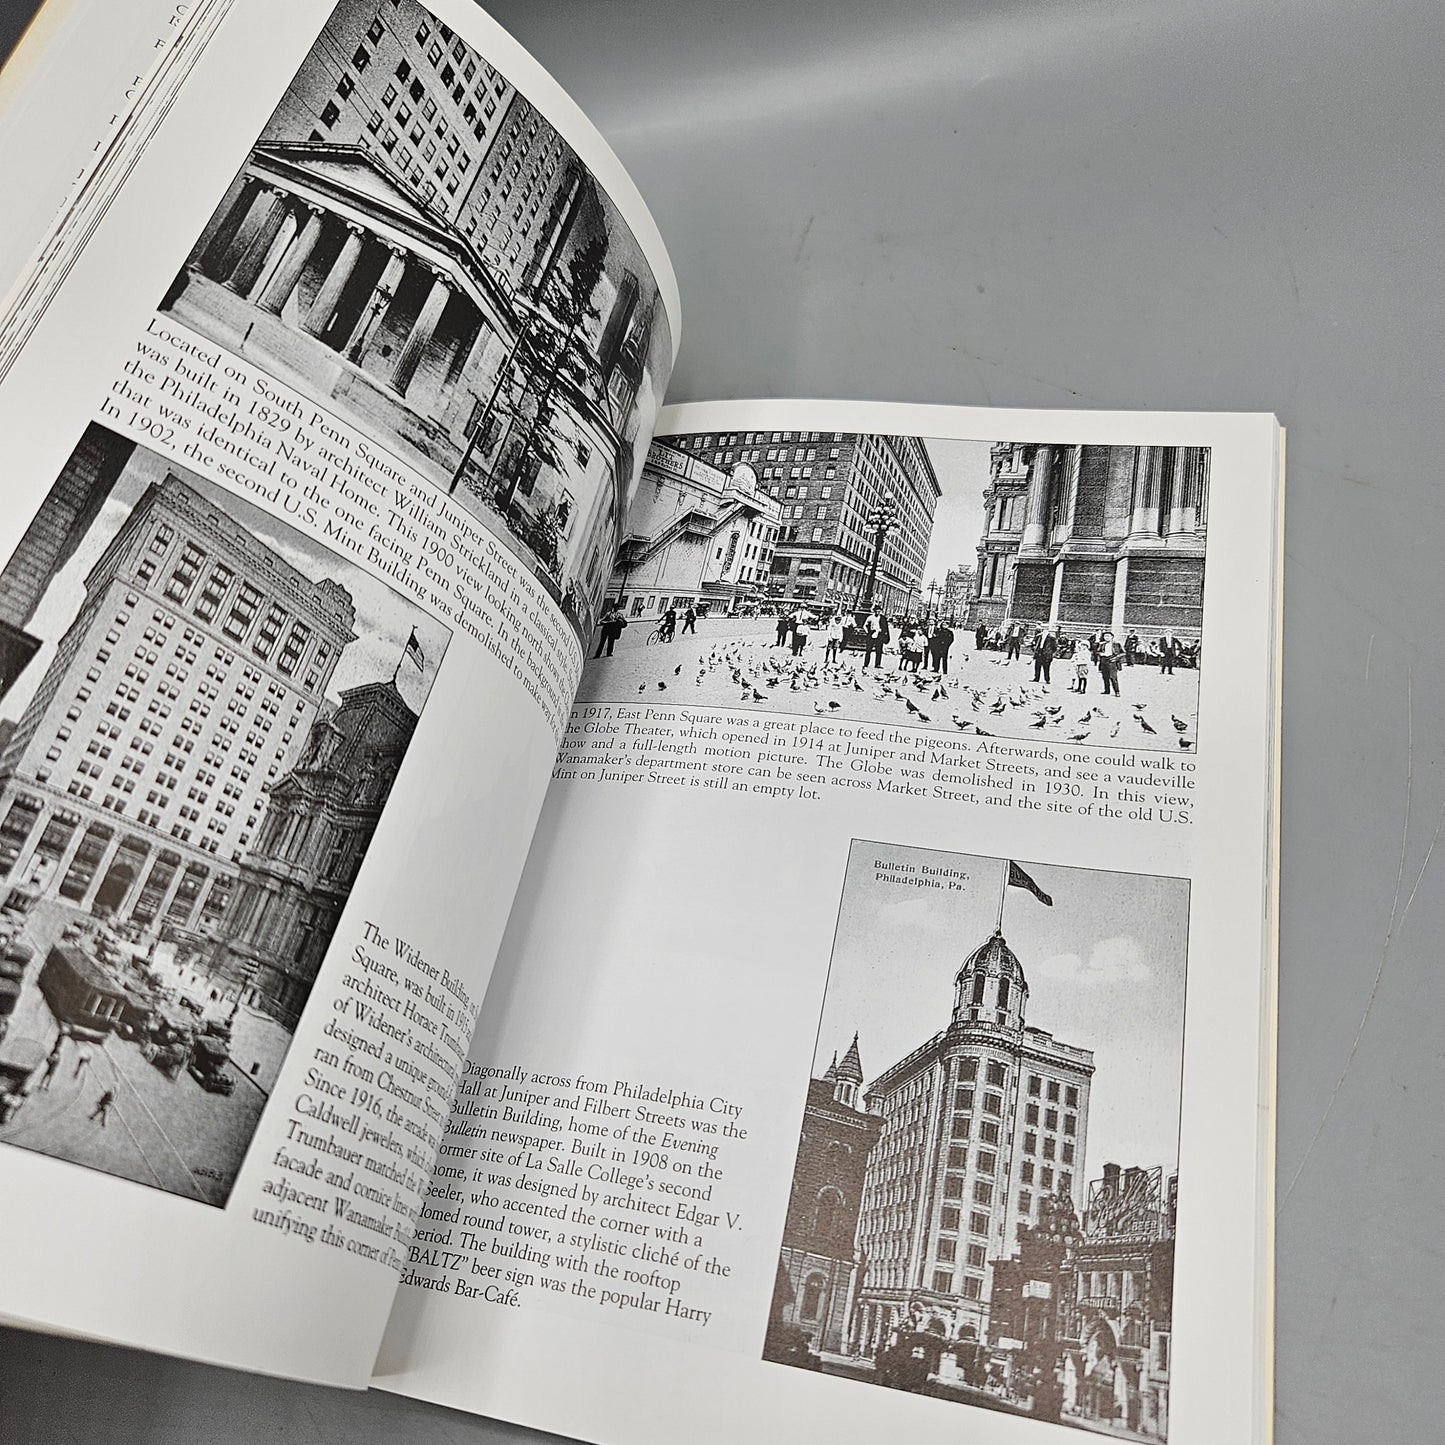 Book: Images of America Philadelphia's Broad Street South & North